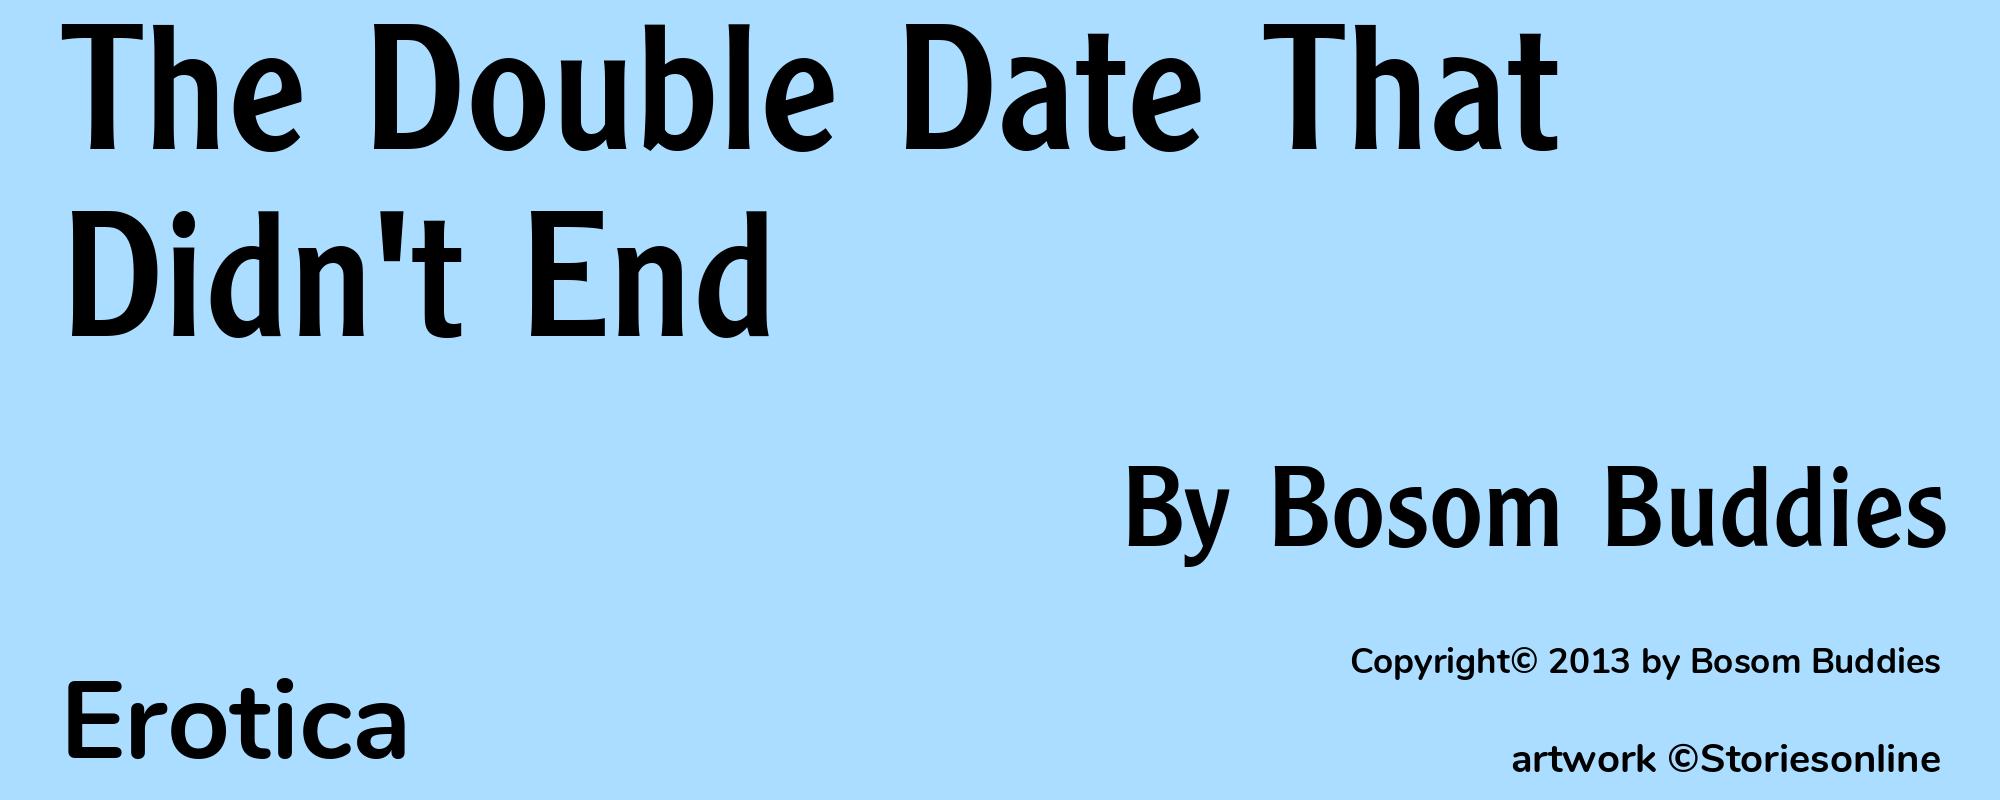 The Double Date That Didn't End - Cover